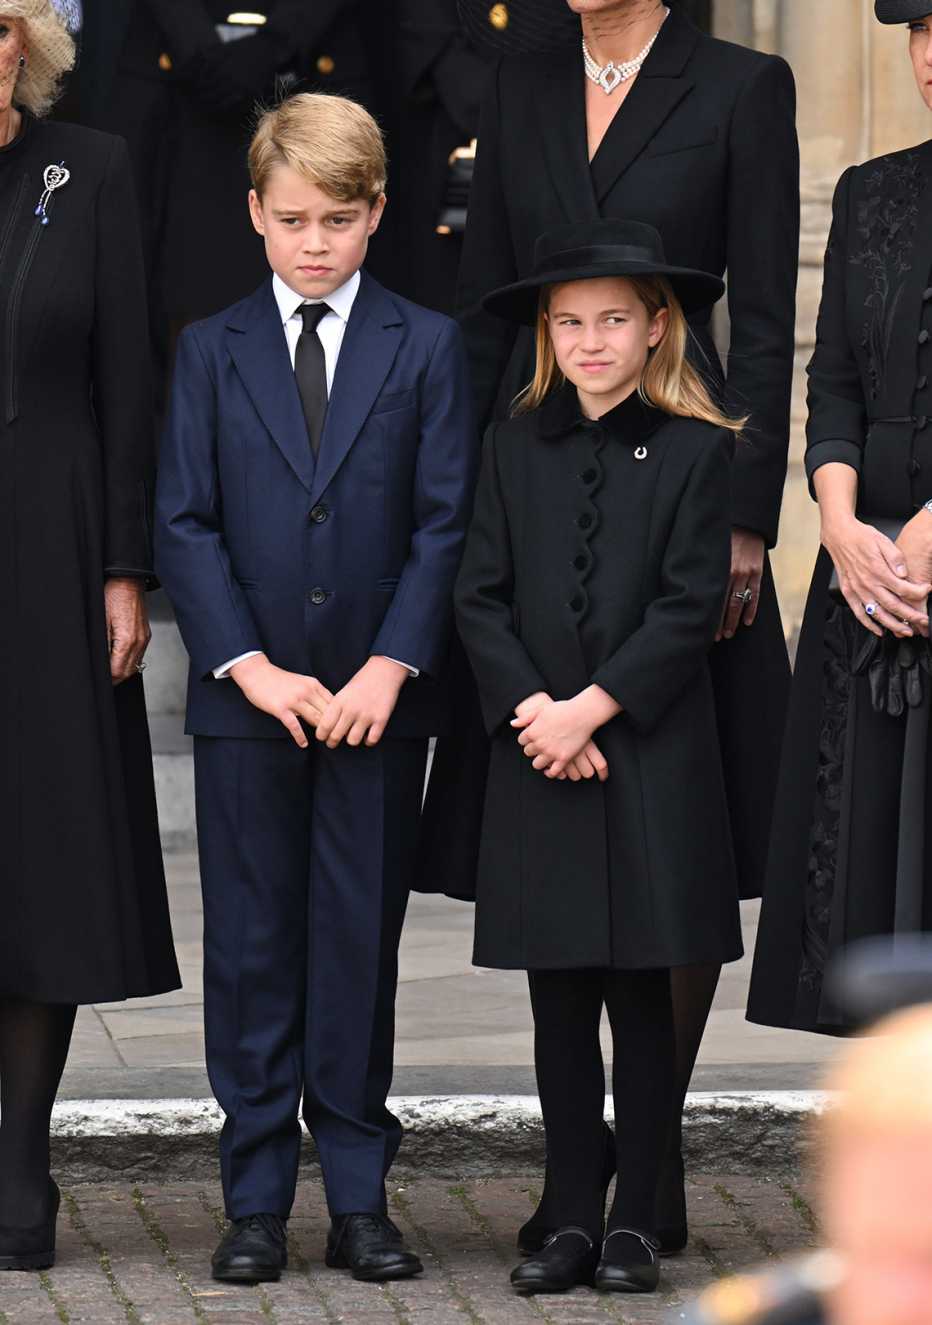 Prince George of Wales and Princess Charlotte of Wales during the State Funeral of Queen Elizabeth II